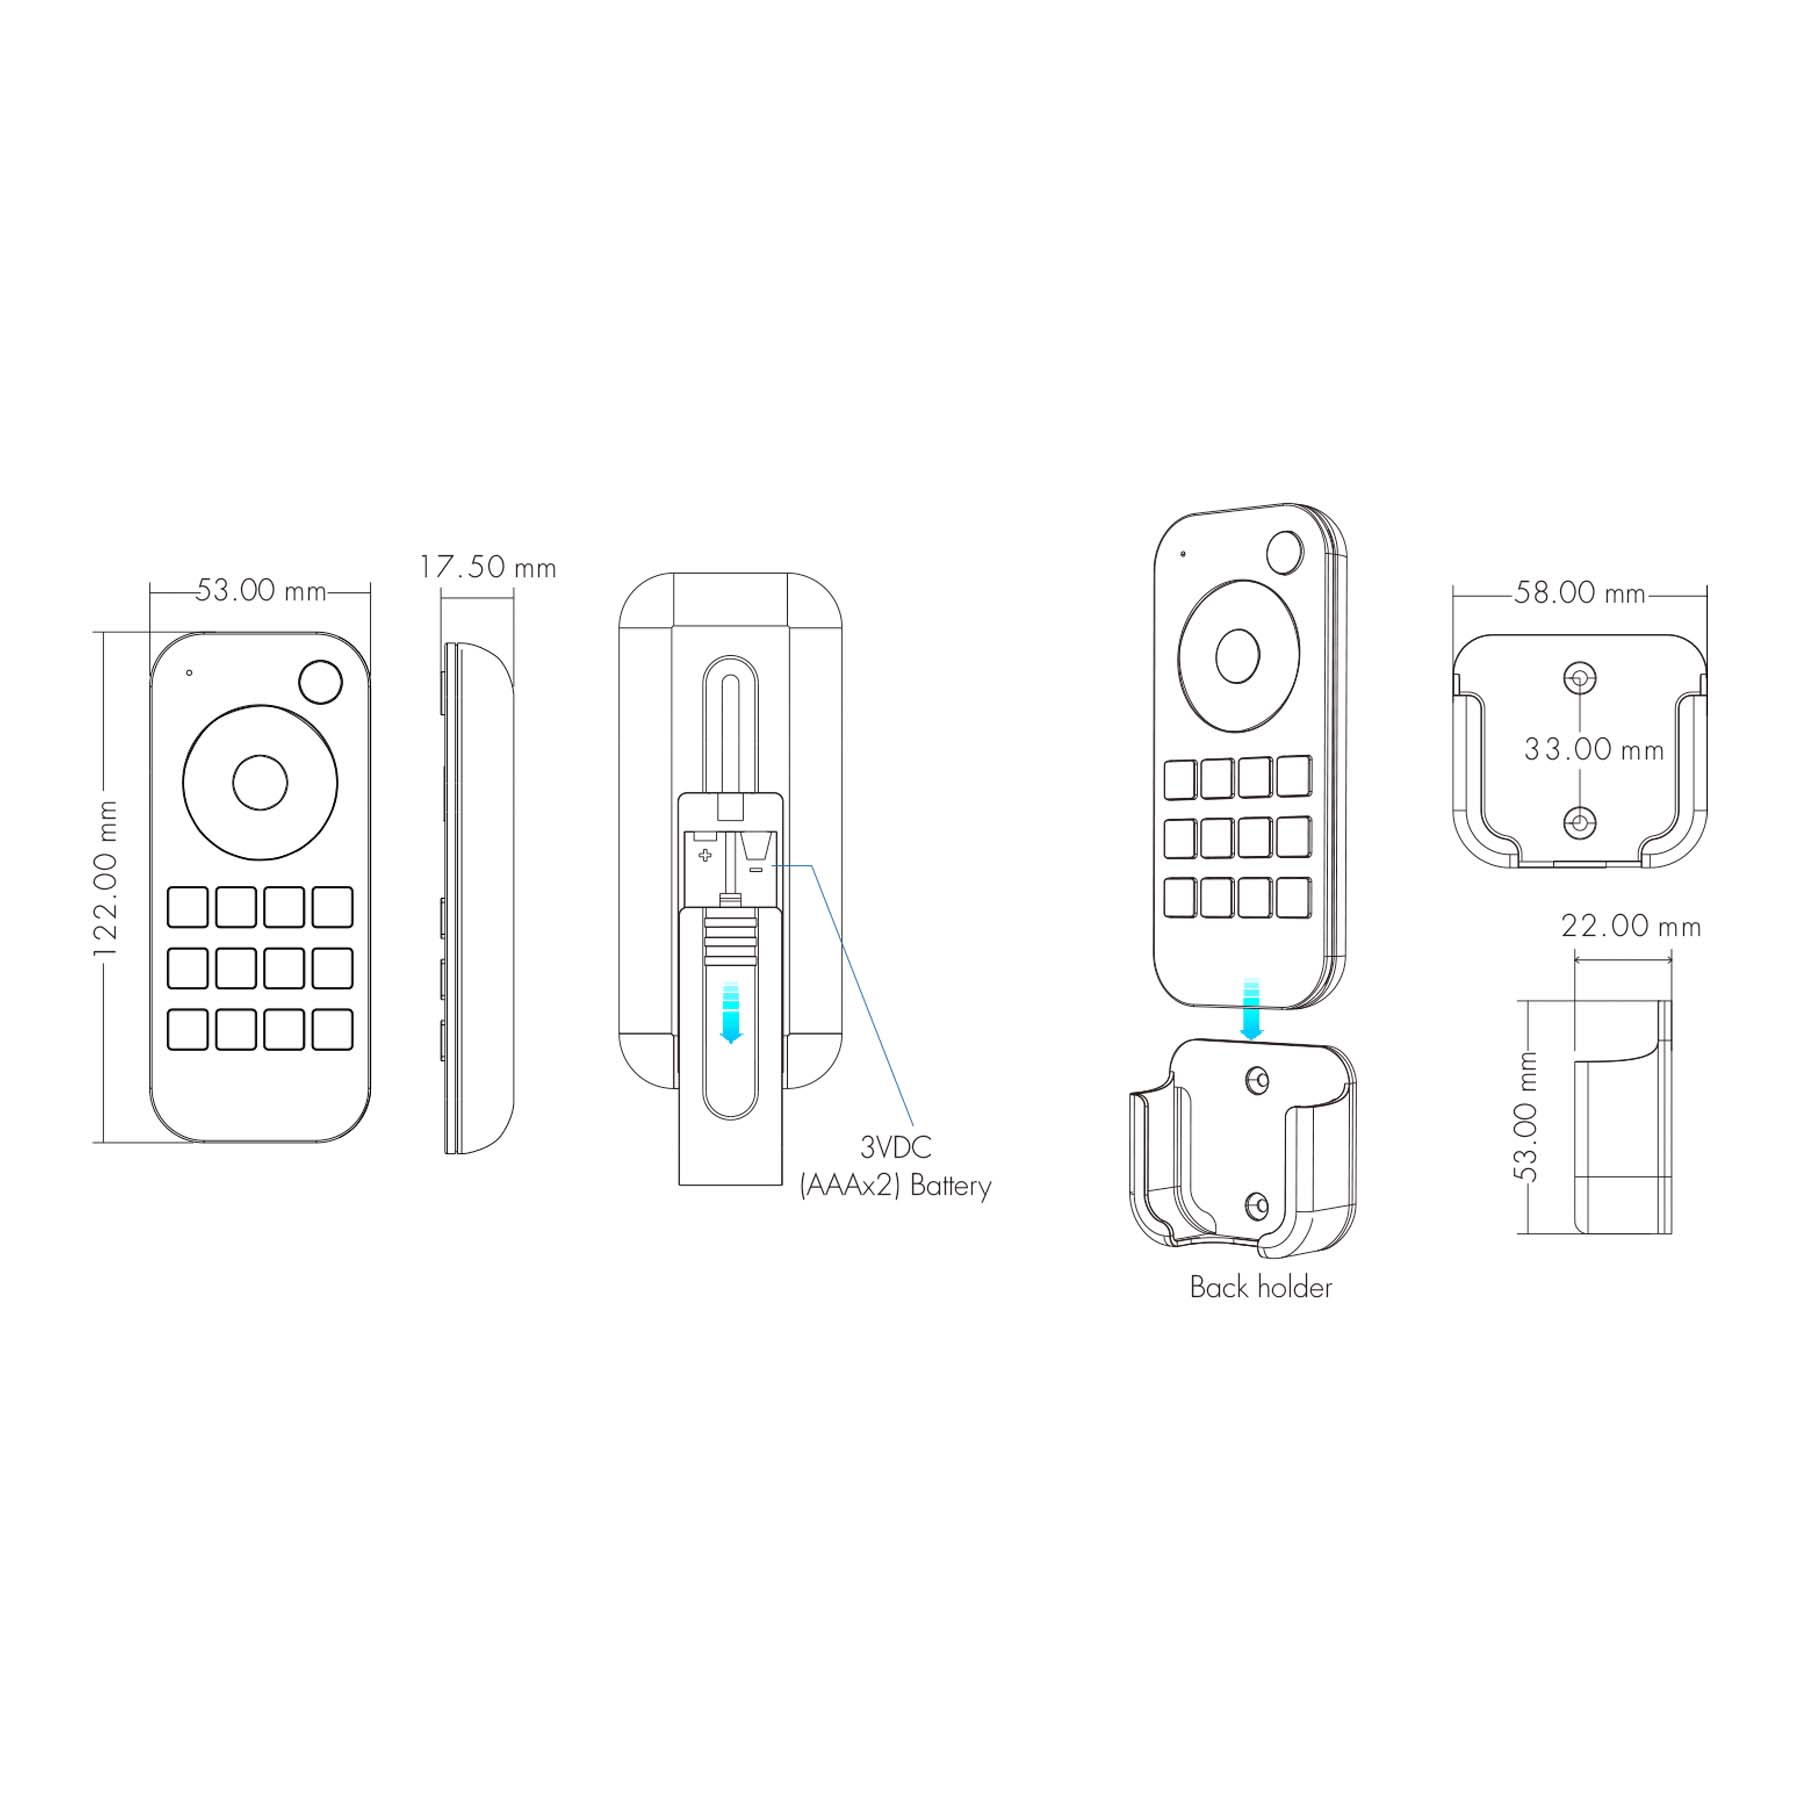 G.W.S. LED 8 Zones Dimming RF Remote Control RT8